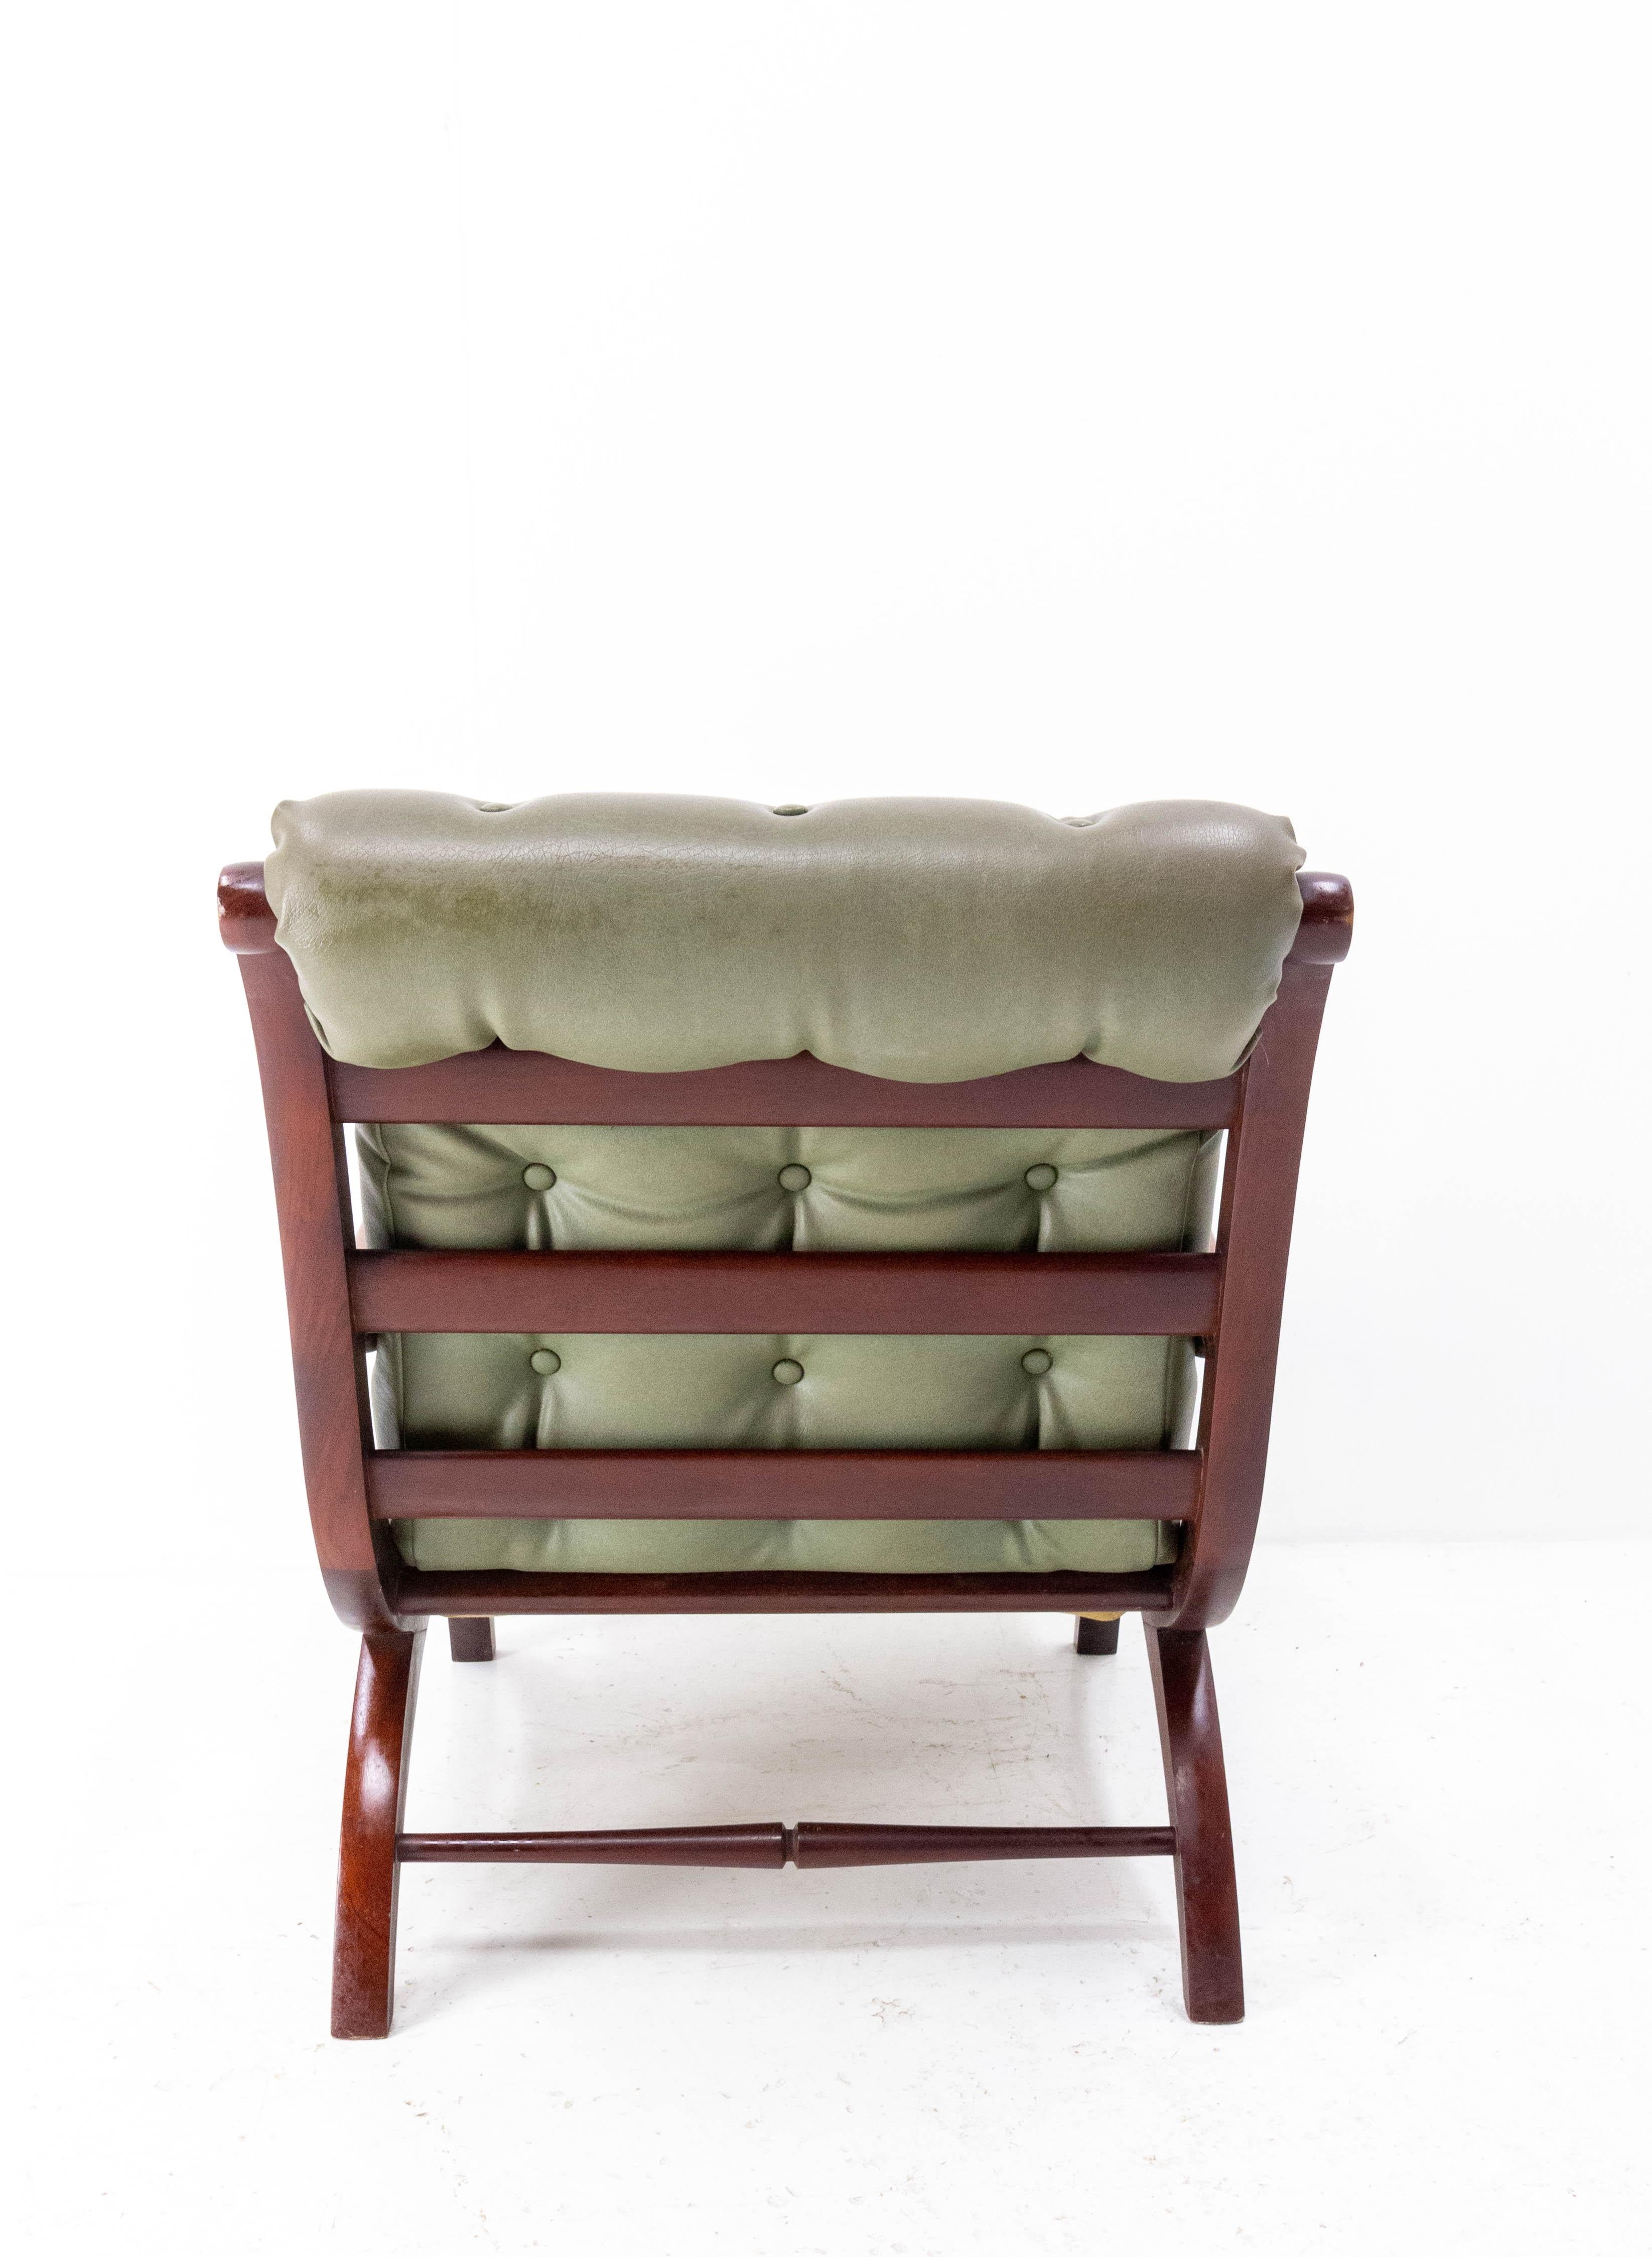 20th Century Vintage Iroko Open Armchair with Deep Padded Skai Cushions, English 1960 For Sale